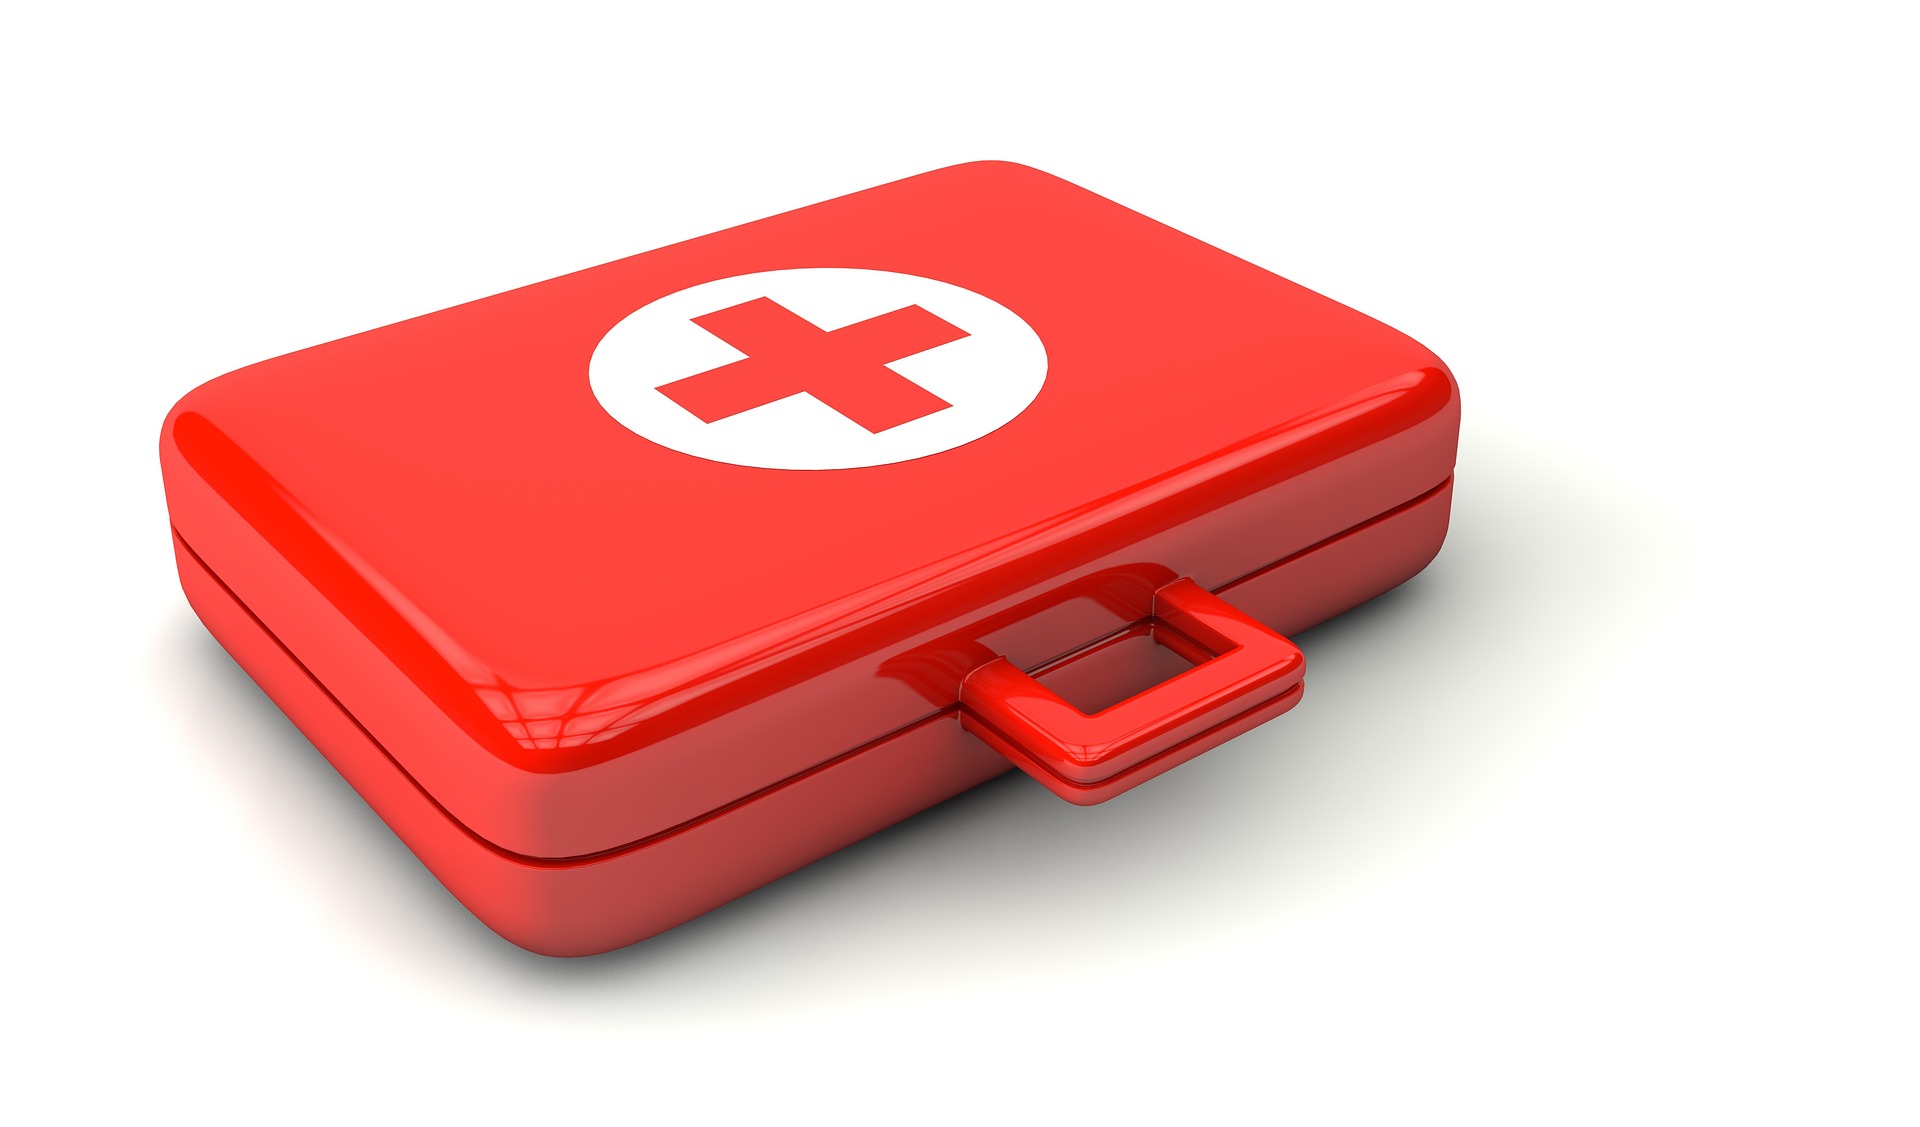 A gleaming red first aid kit with a handle for easy carrying.